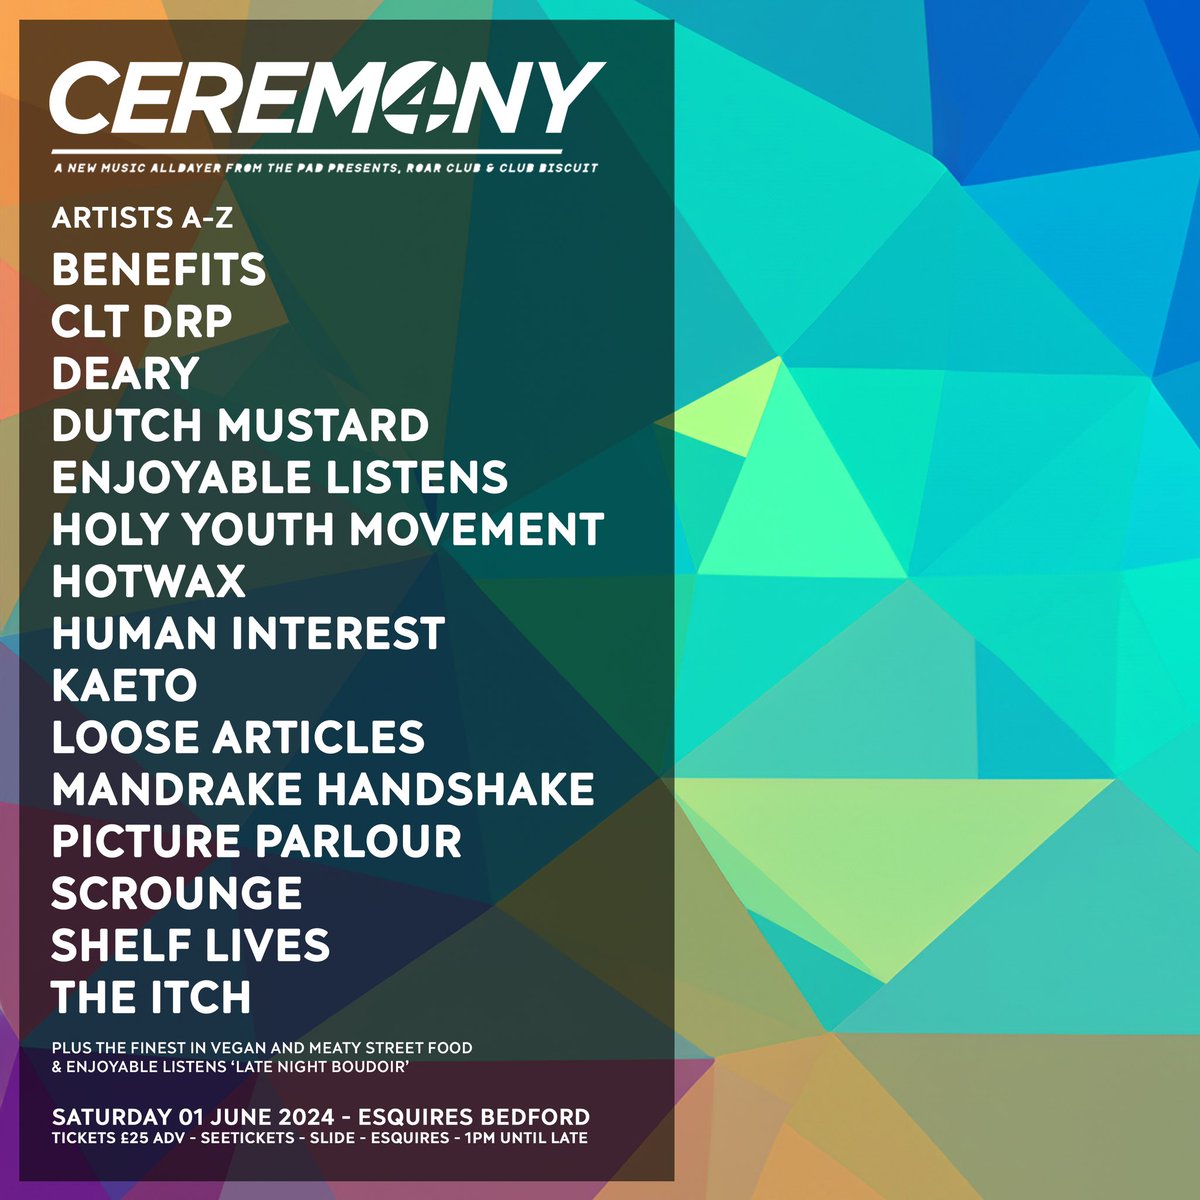 Excited to be joining the ‘Ceremony’ all-dayer at @bedfordesquires on Saturday 1st June - amazing line-up as well… tickets in our bio! d&b x